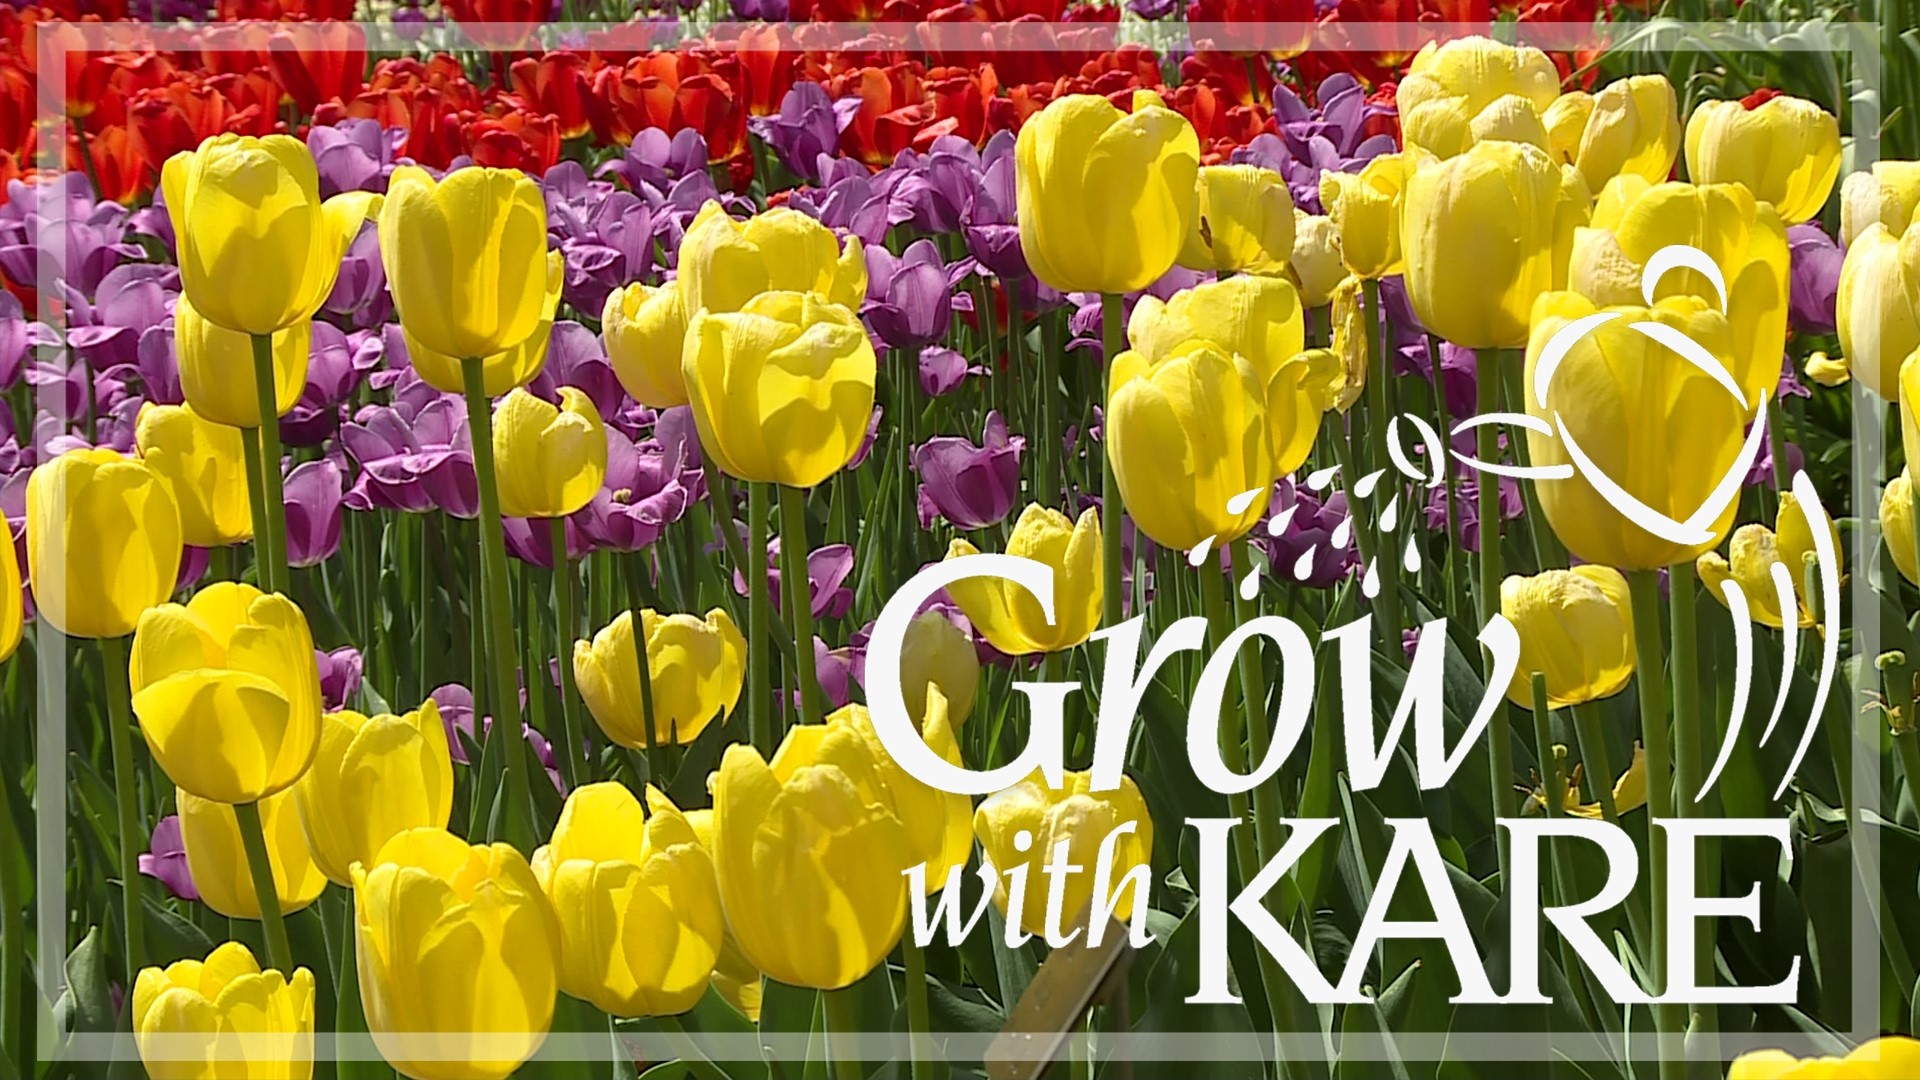 We know most folks can recognize and identify tulips, but now, you can impress your fellow flower-loving friends by identifying each of its different forms.